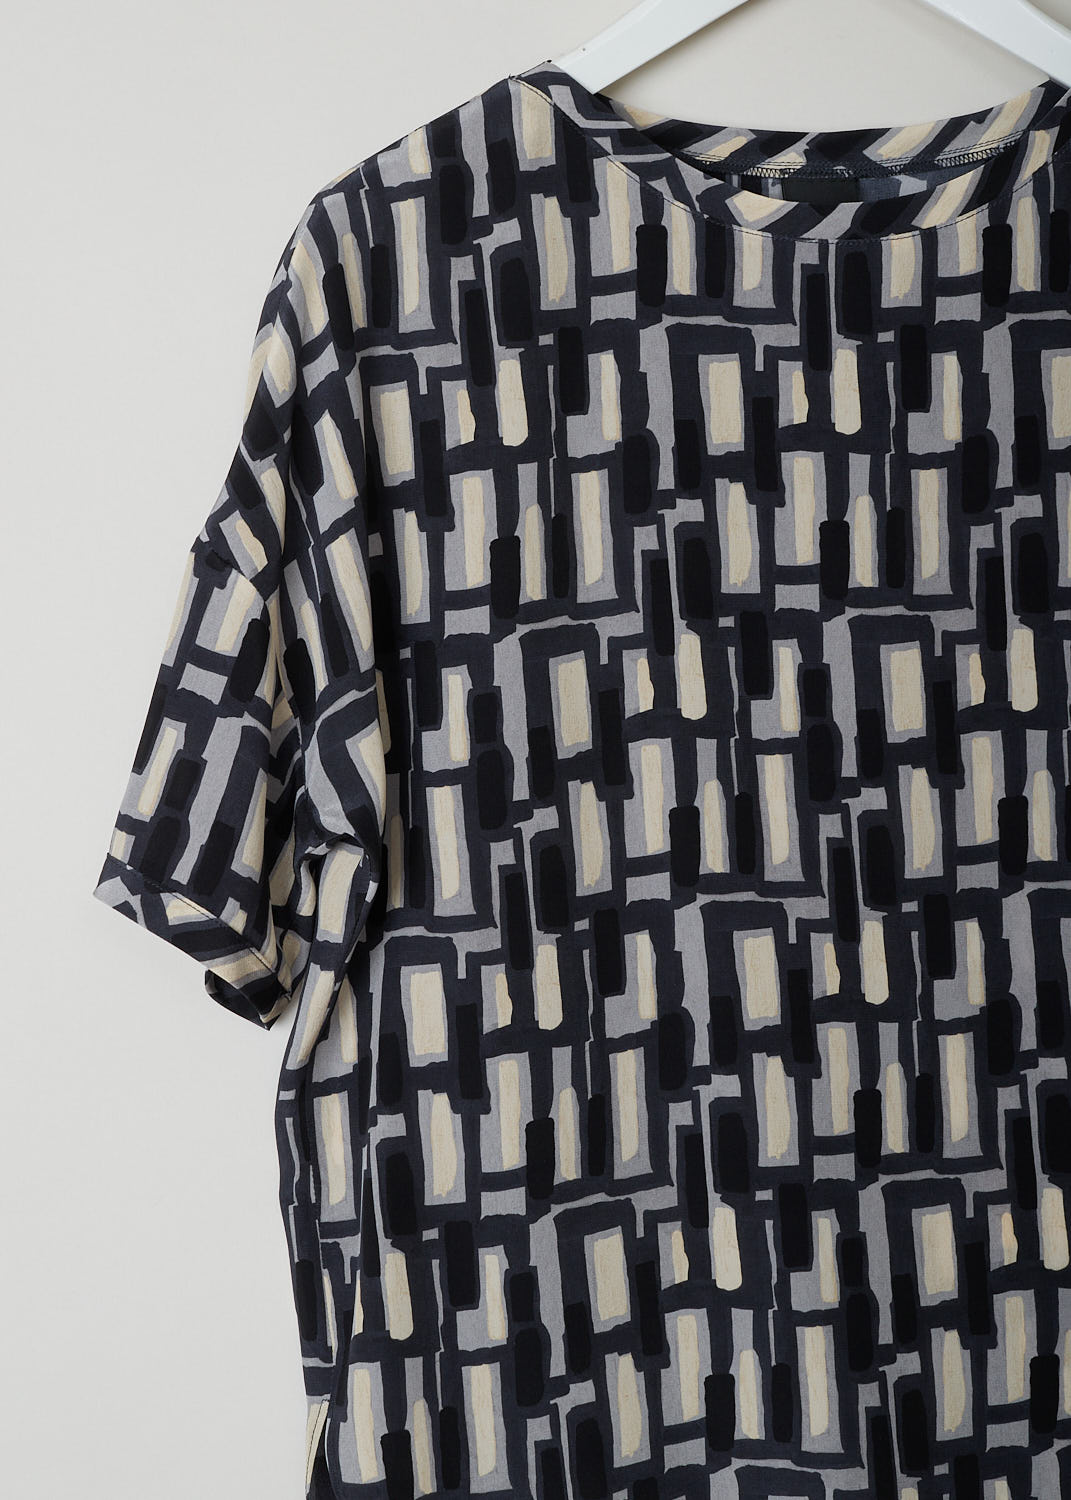 ASPESI, SILK PRINTED TOP, 5618_V126_66173, Print, Detail, This short sleeve top has a geometric print in black, grey and off-white hues. The top features a rounded neckline, an asymmetric finish with small slits on the sides and a rounded hemline.
